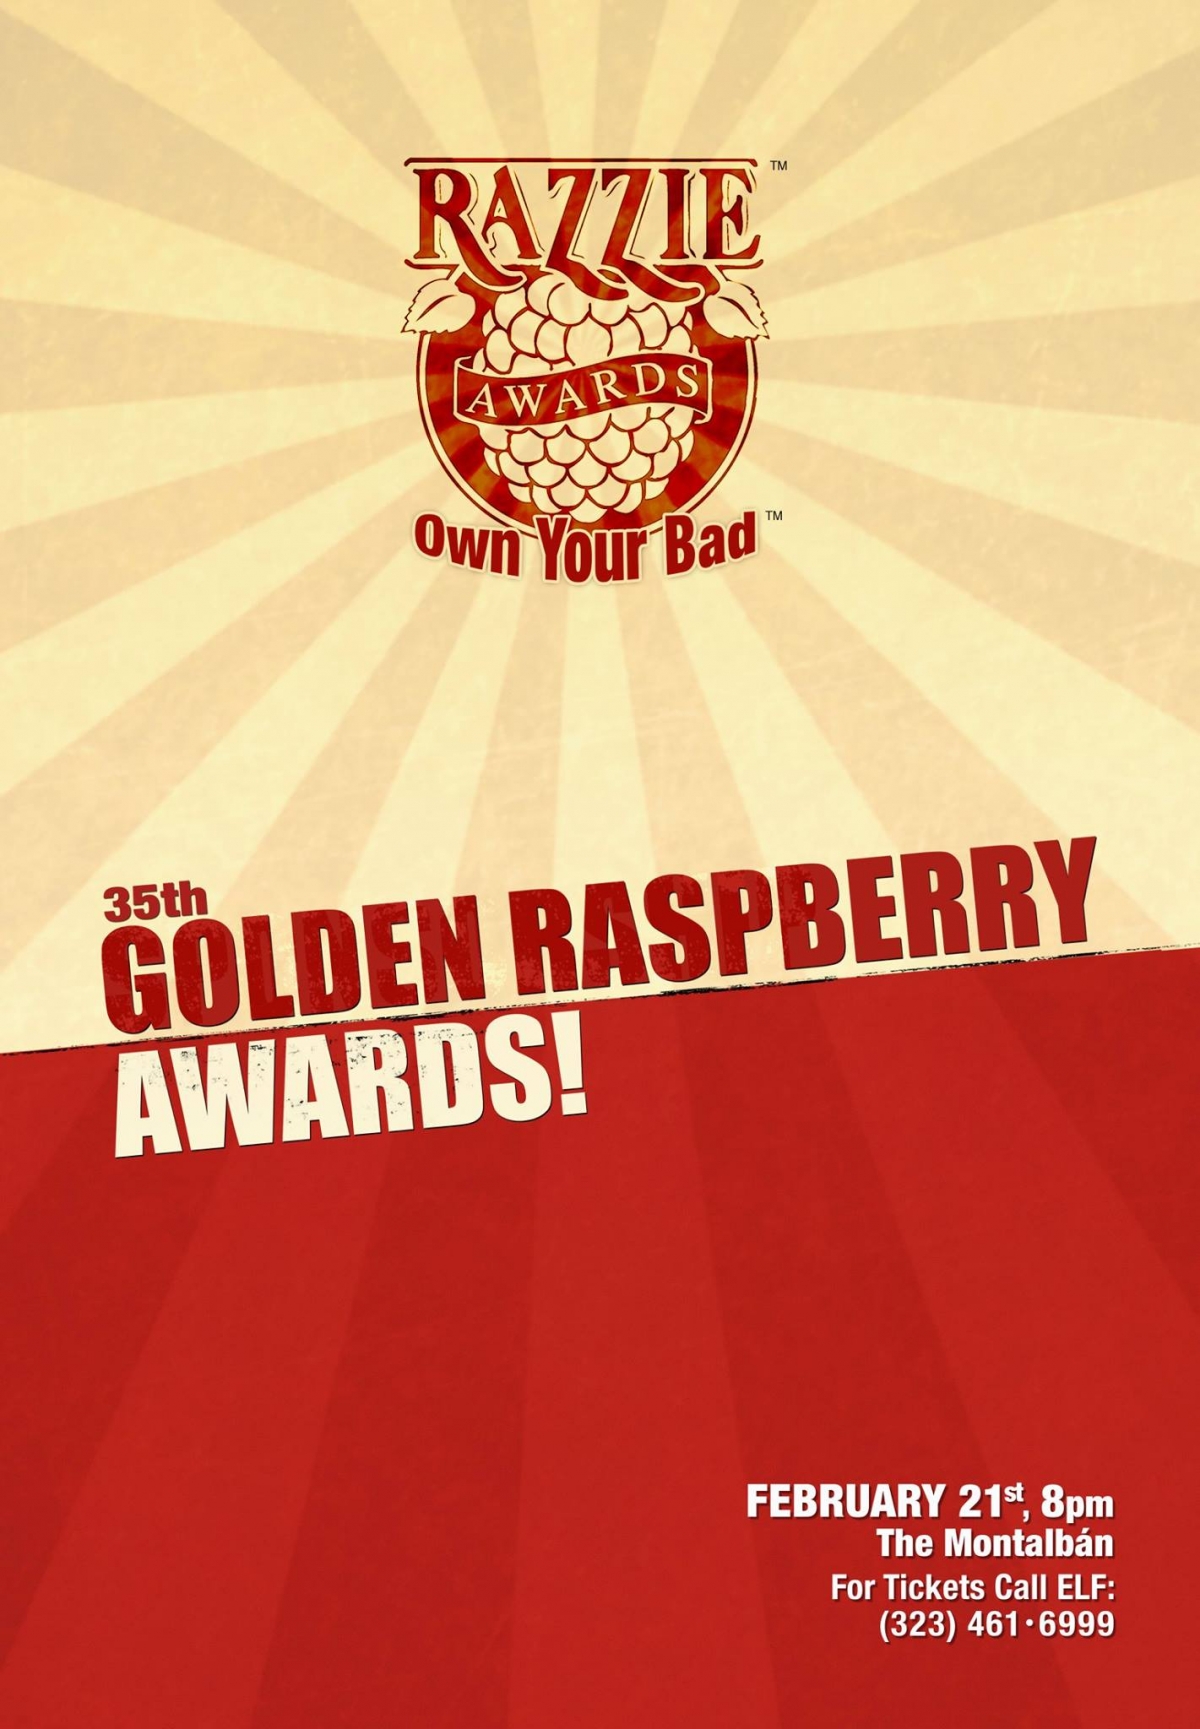 Razzie Awards 2015 Live Stream Predictions And Where To Watch Golden Raspberry Awards Live